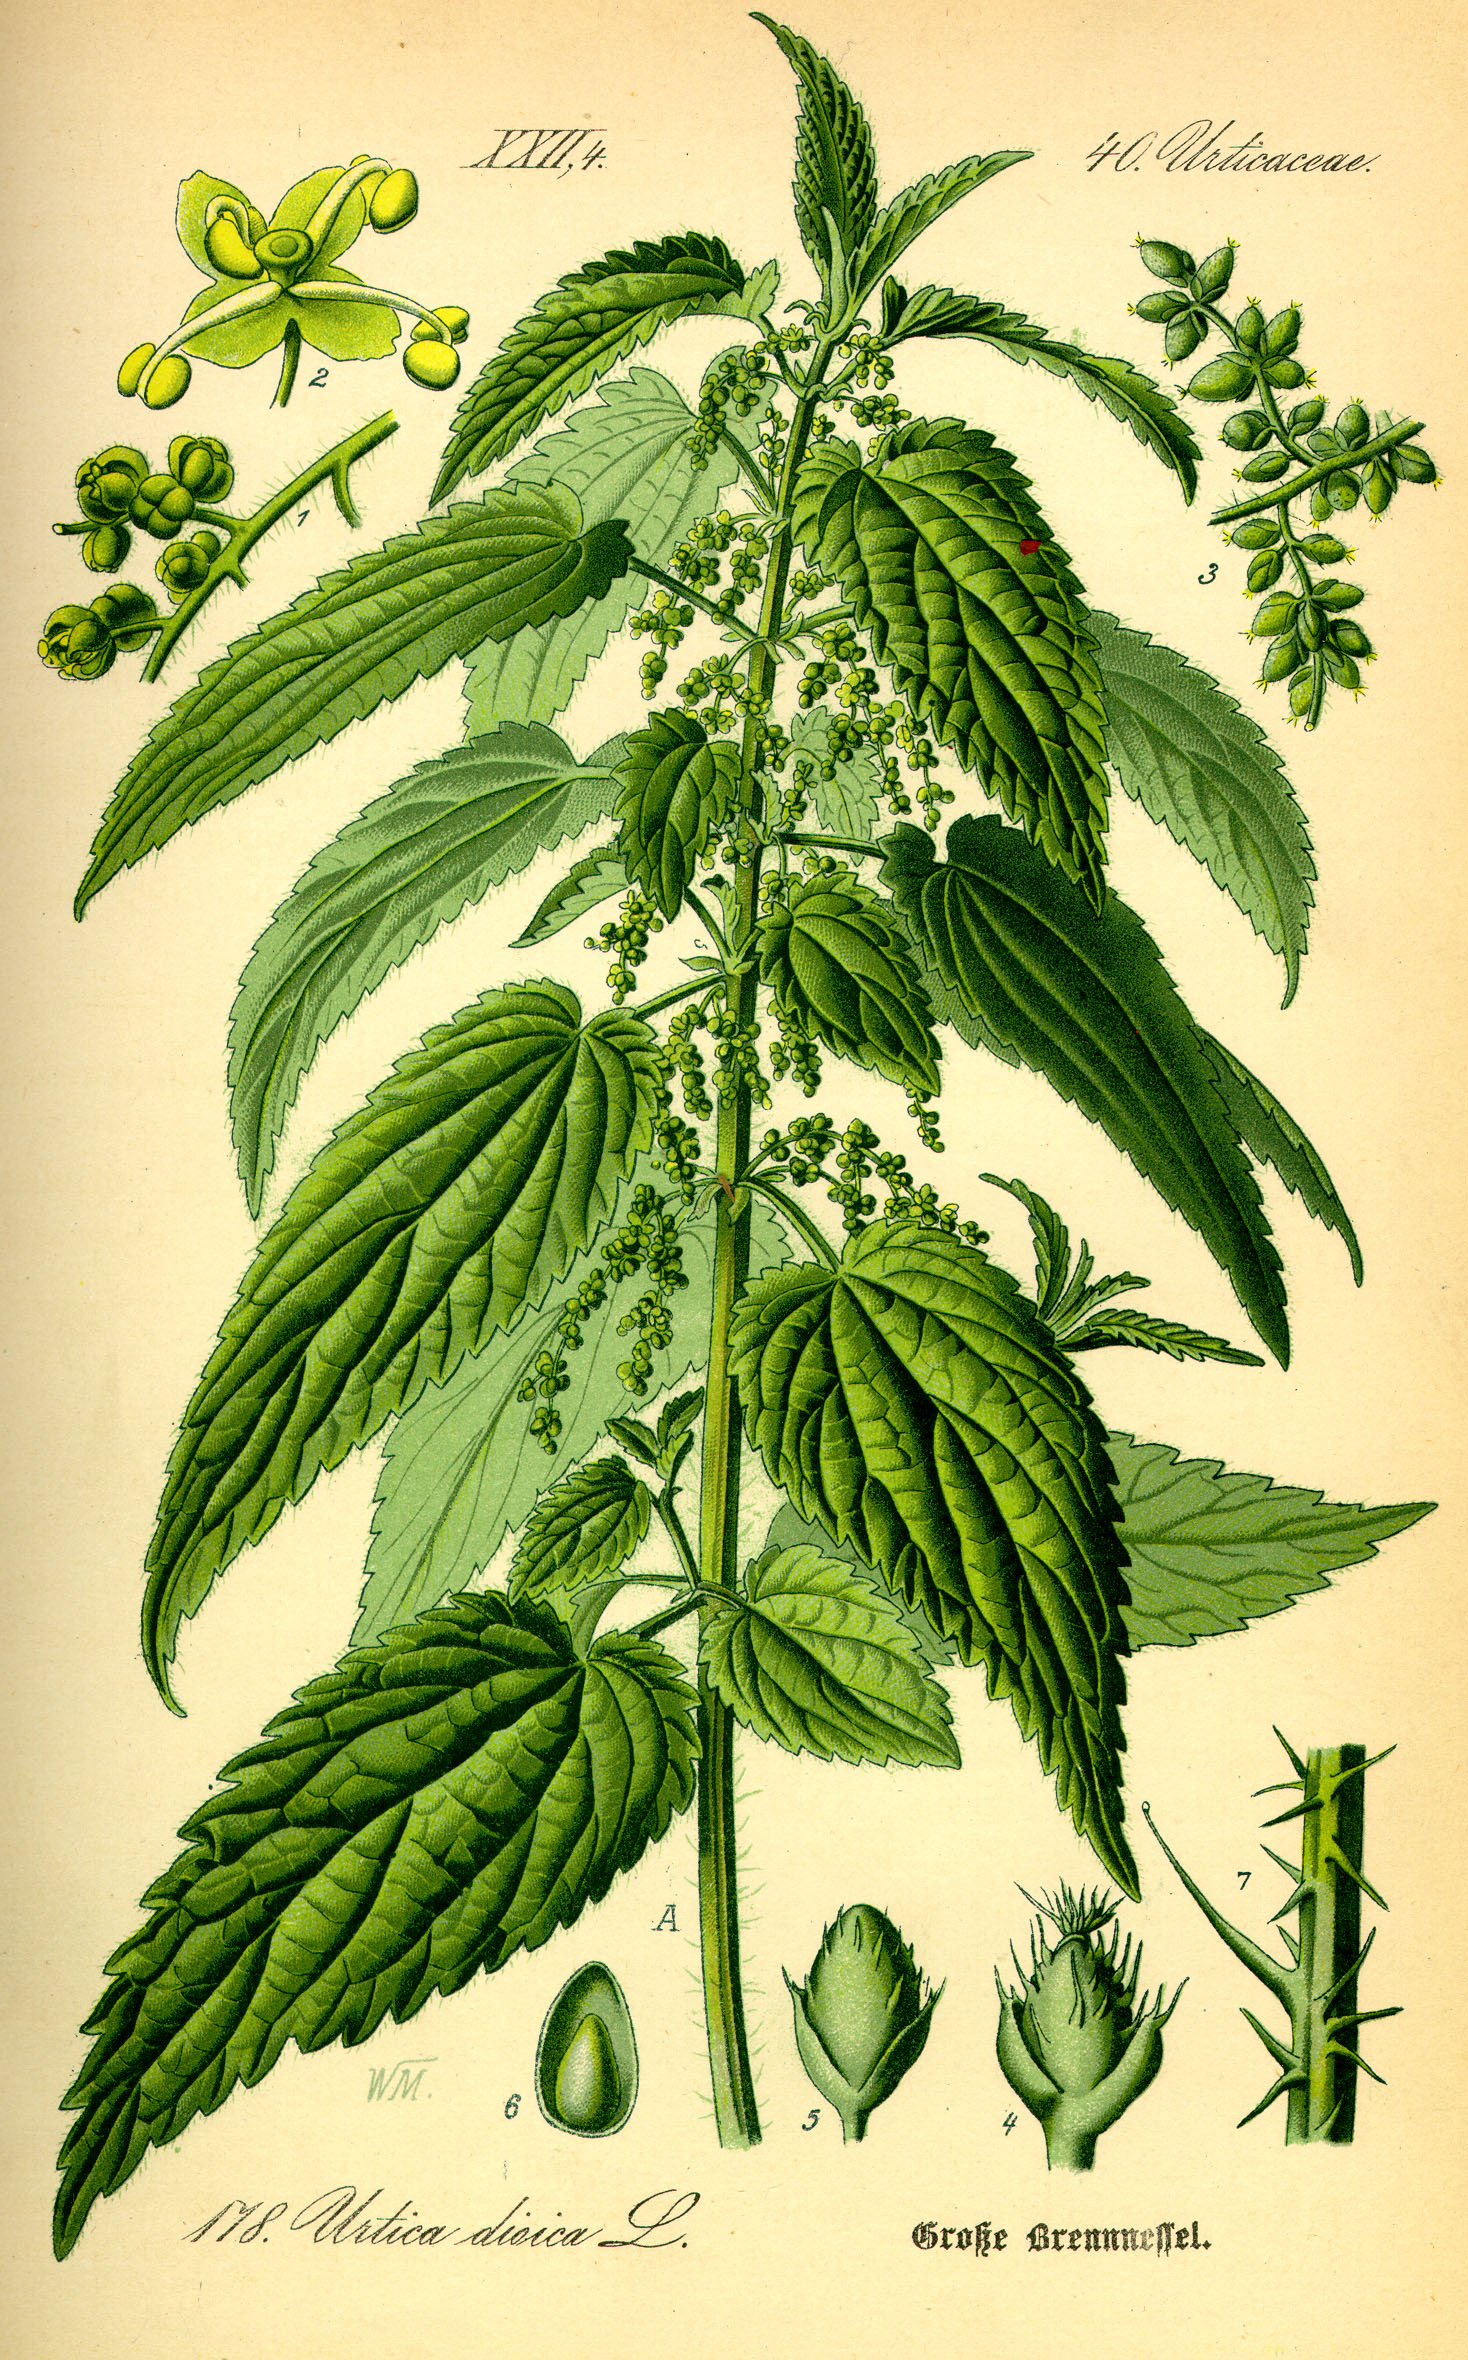 http://upload.wikimedia.org/wikipedia/commons/d/d2/Illustration_Urtica_dioica0.jpg